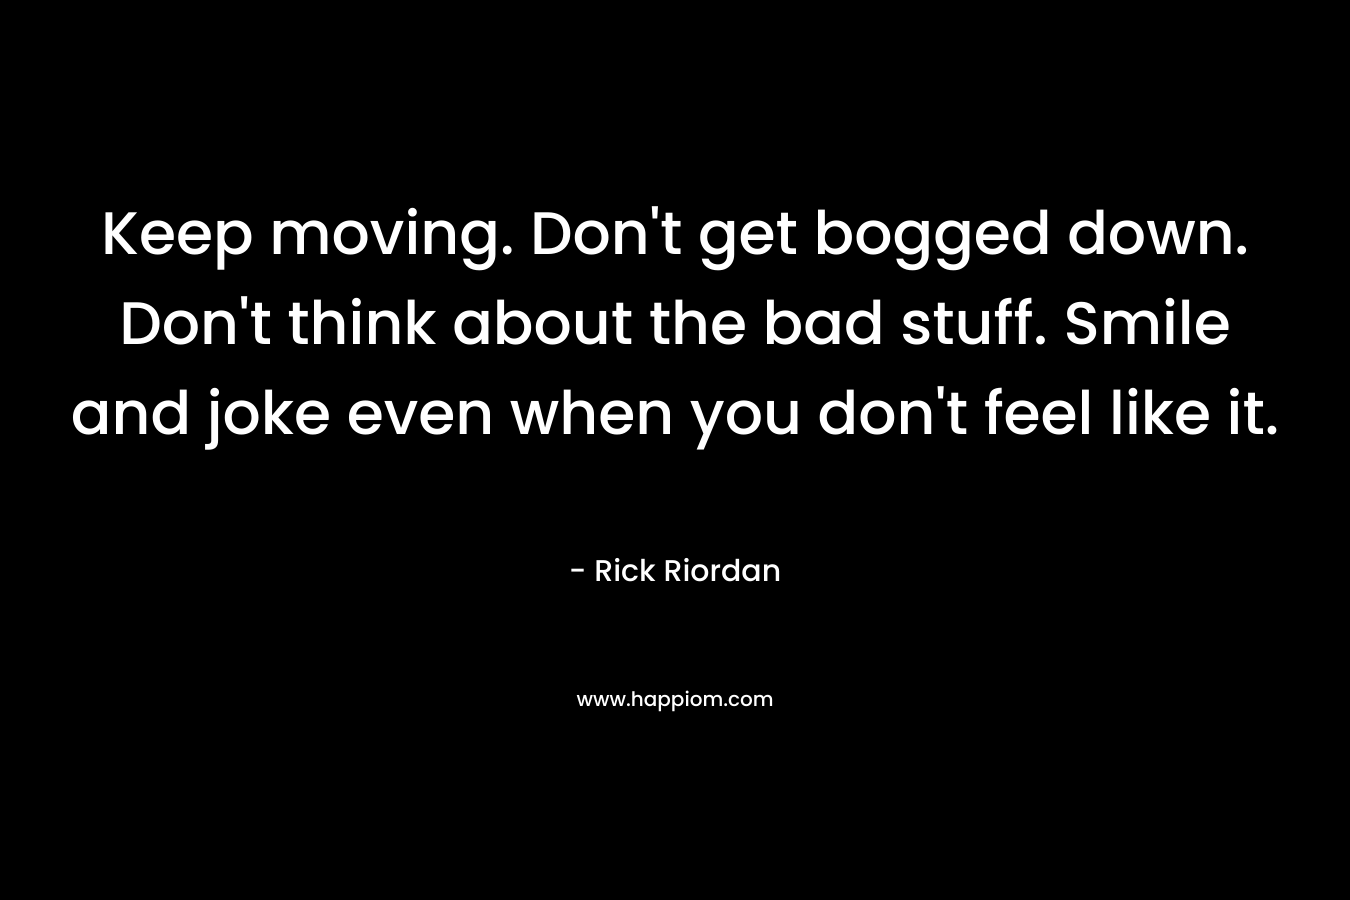 Keep moving. Don’t get bogged down. Don’t think about the bad stuff. Smile and joke even when you don’t feel like it. – Rick Riordan